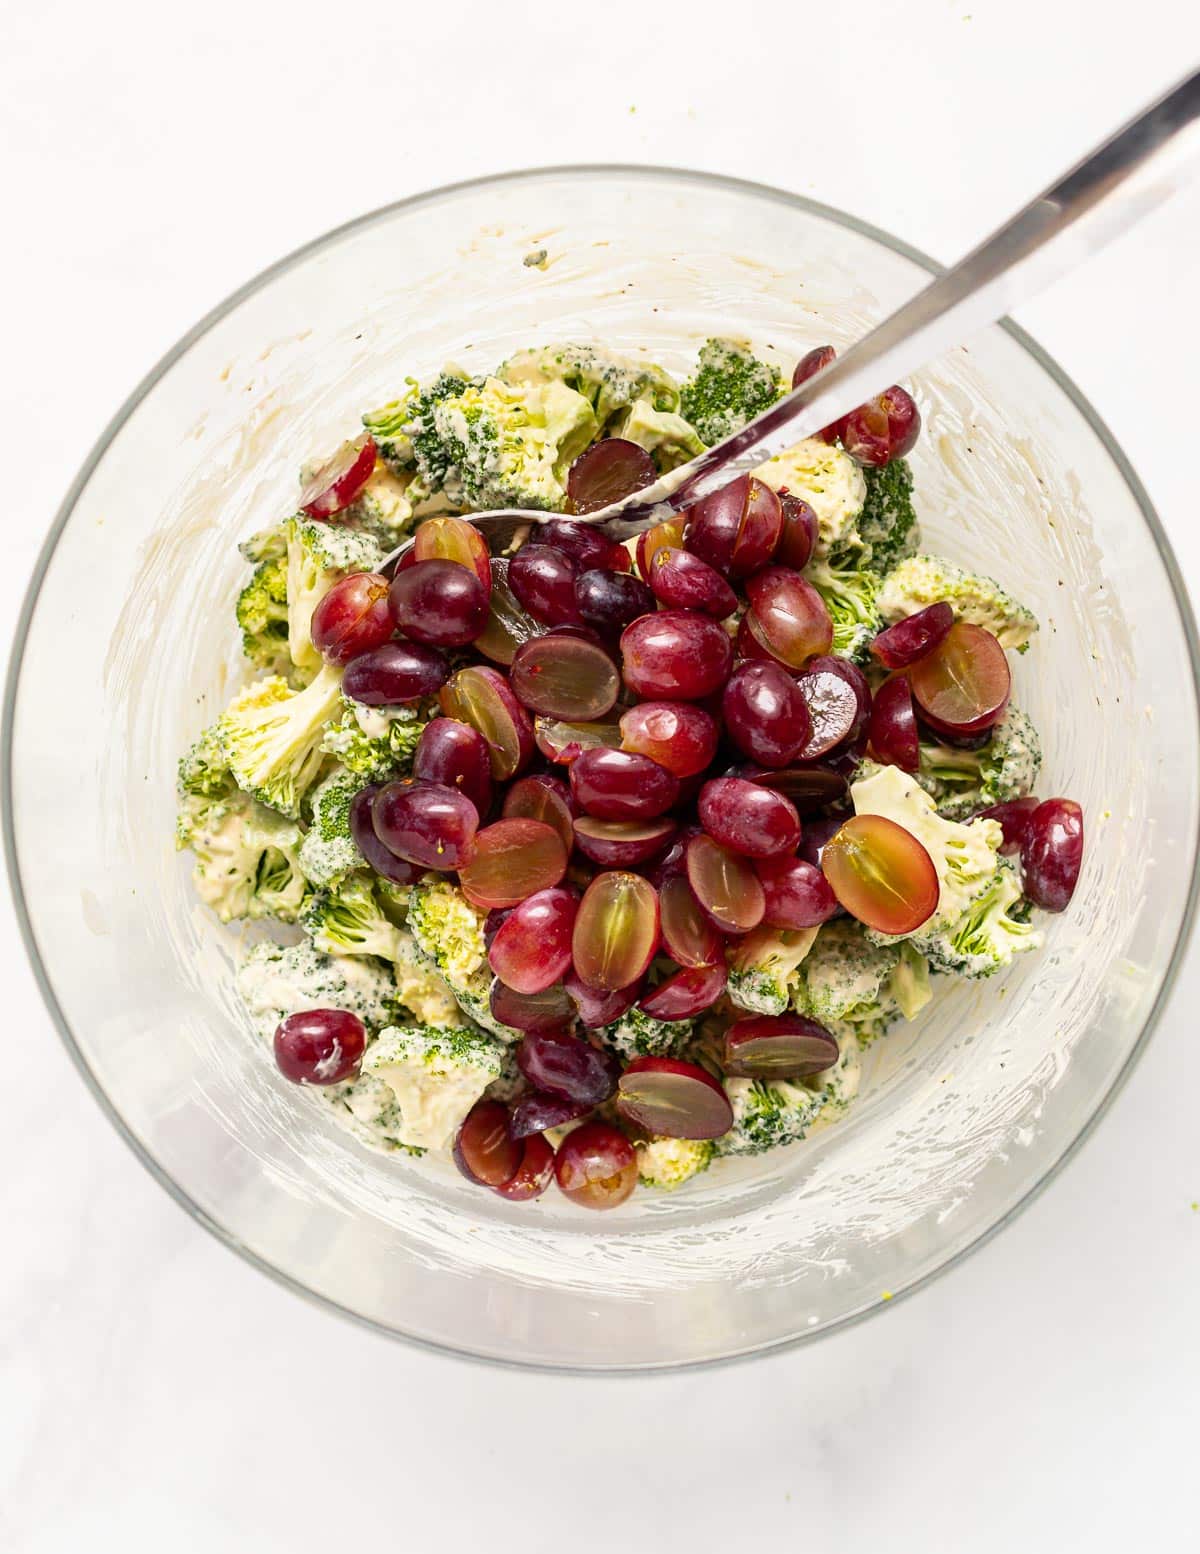 a bowl of broccoli tossed in creamy dressing with red grapes on top